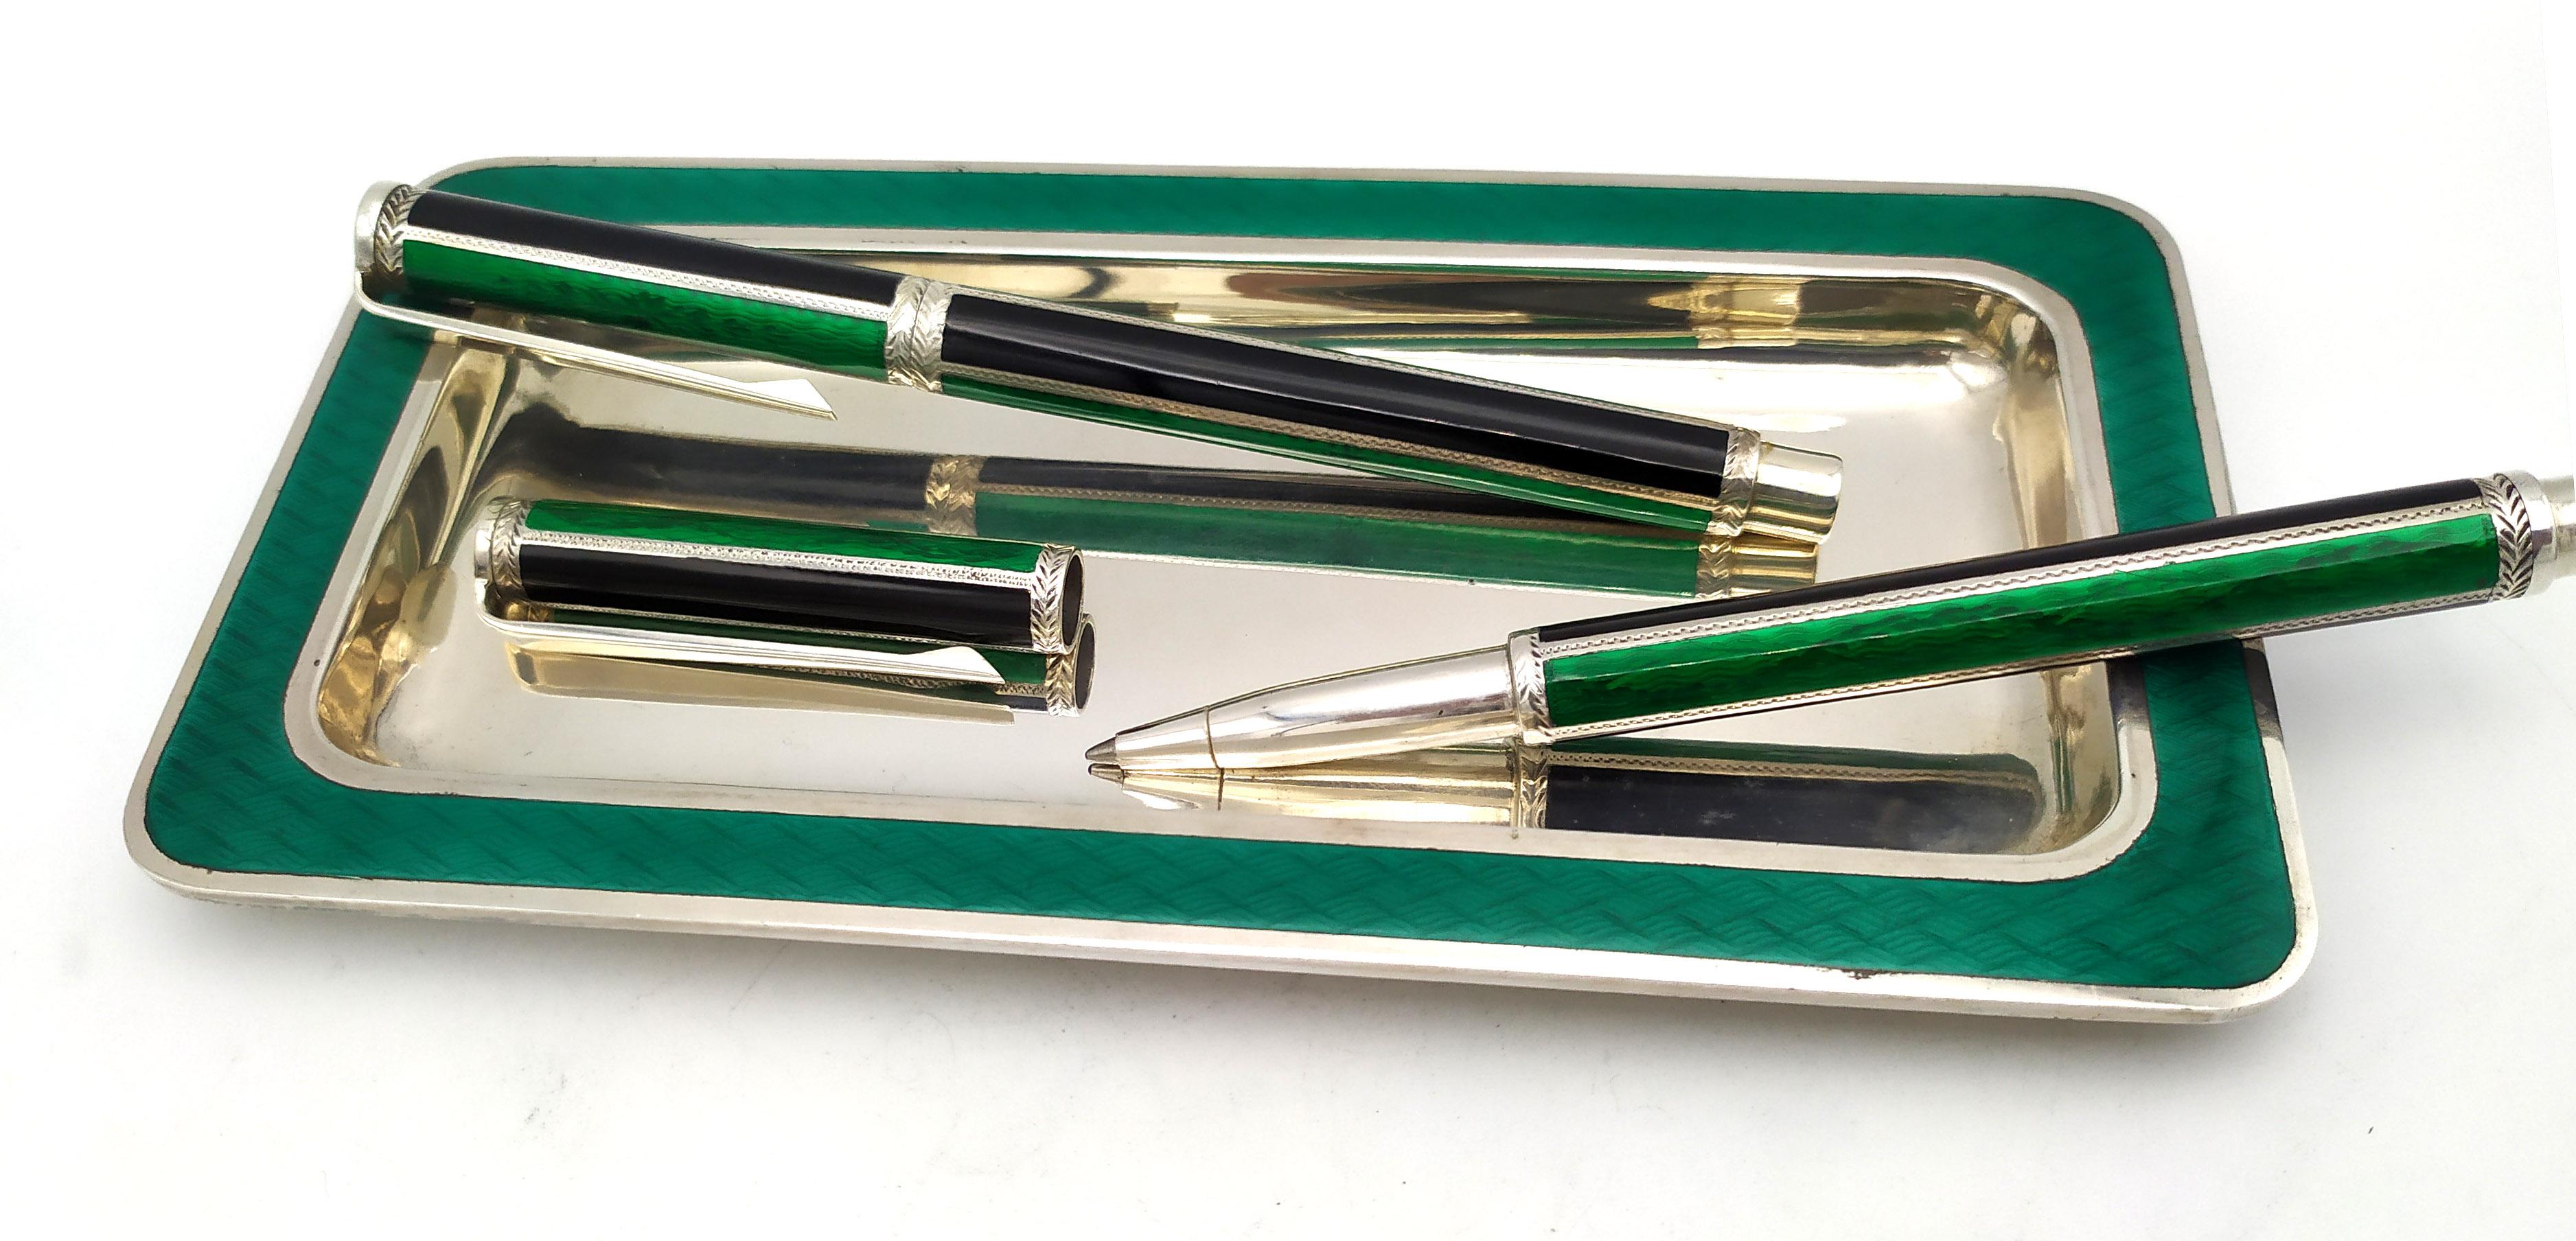 Fountain pen, Ballpoint pen and tray for a Desk Set green enamel Salimbeni  In Excellent Condition For Sale In Firenze, FI